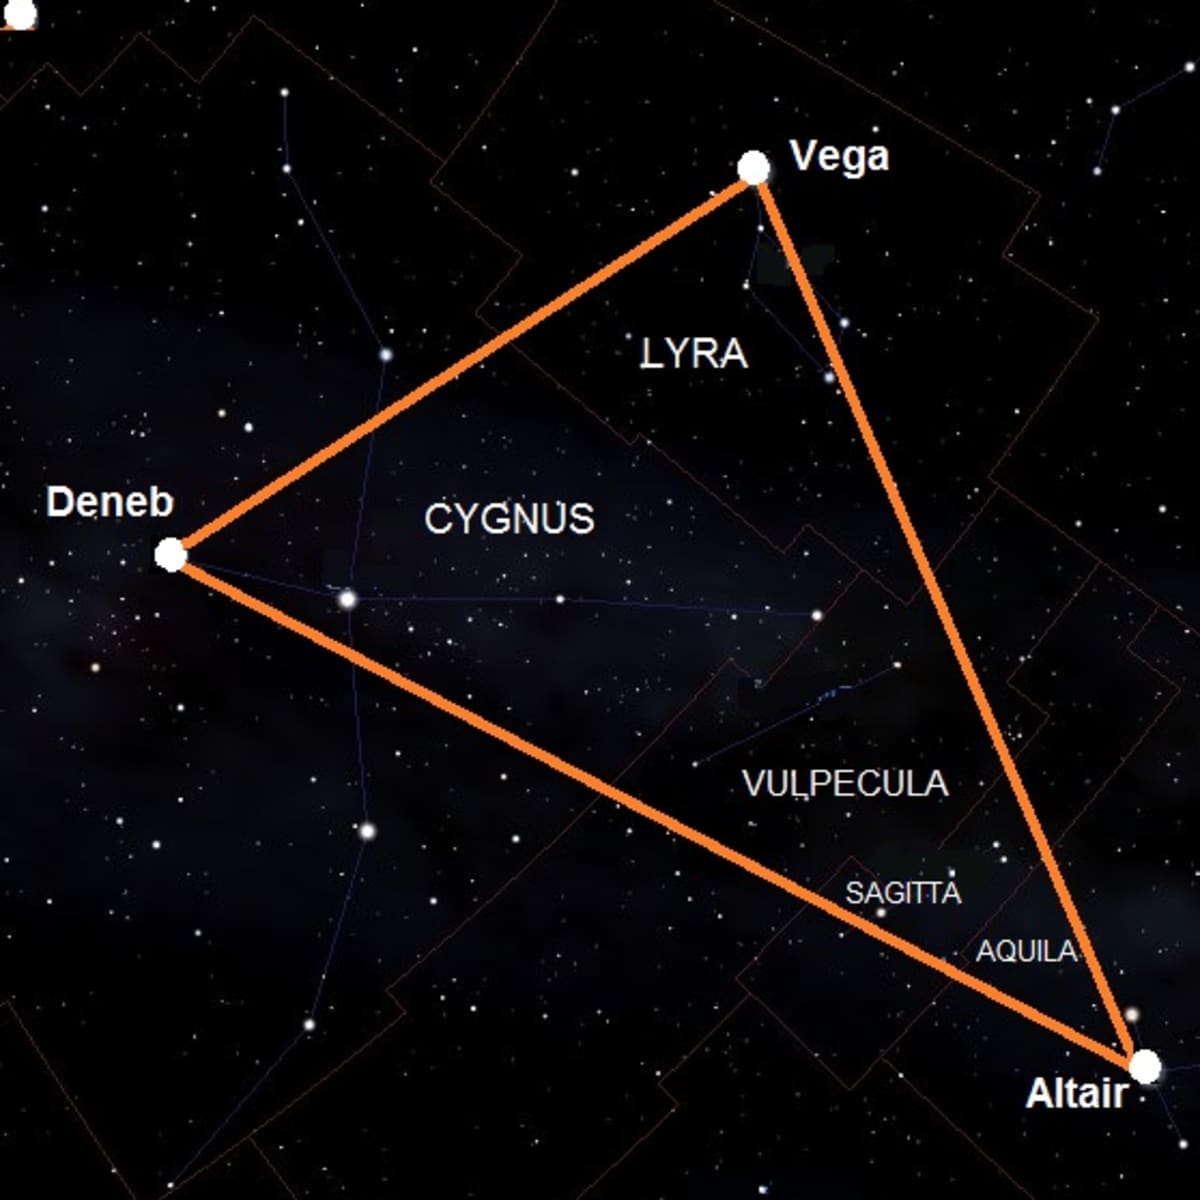 Exploring the Summer Triangle in the Night Sky - Owlcation